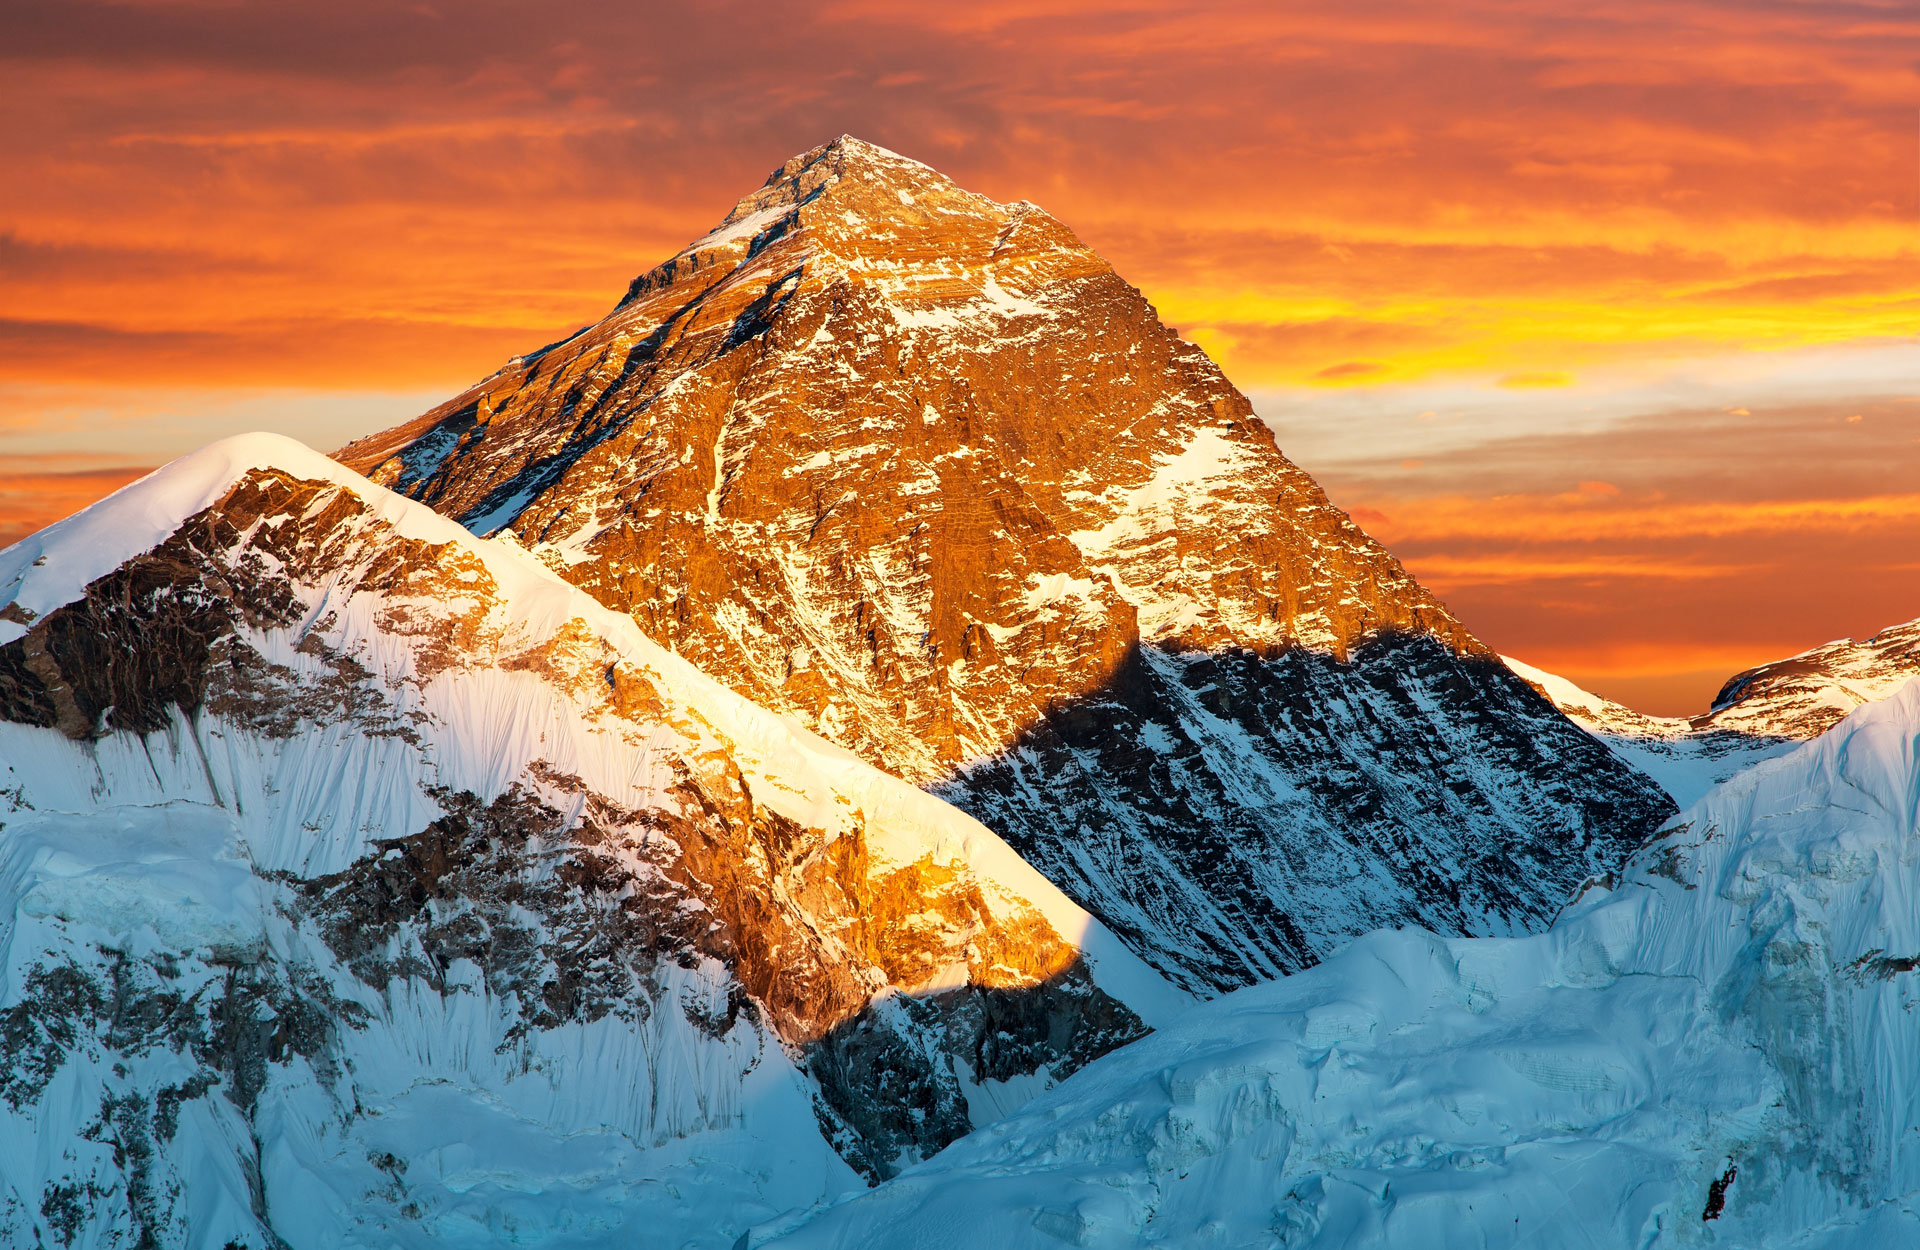 Majestic Everest: Gazing Upon the World from Kalapathar's Summit